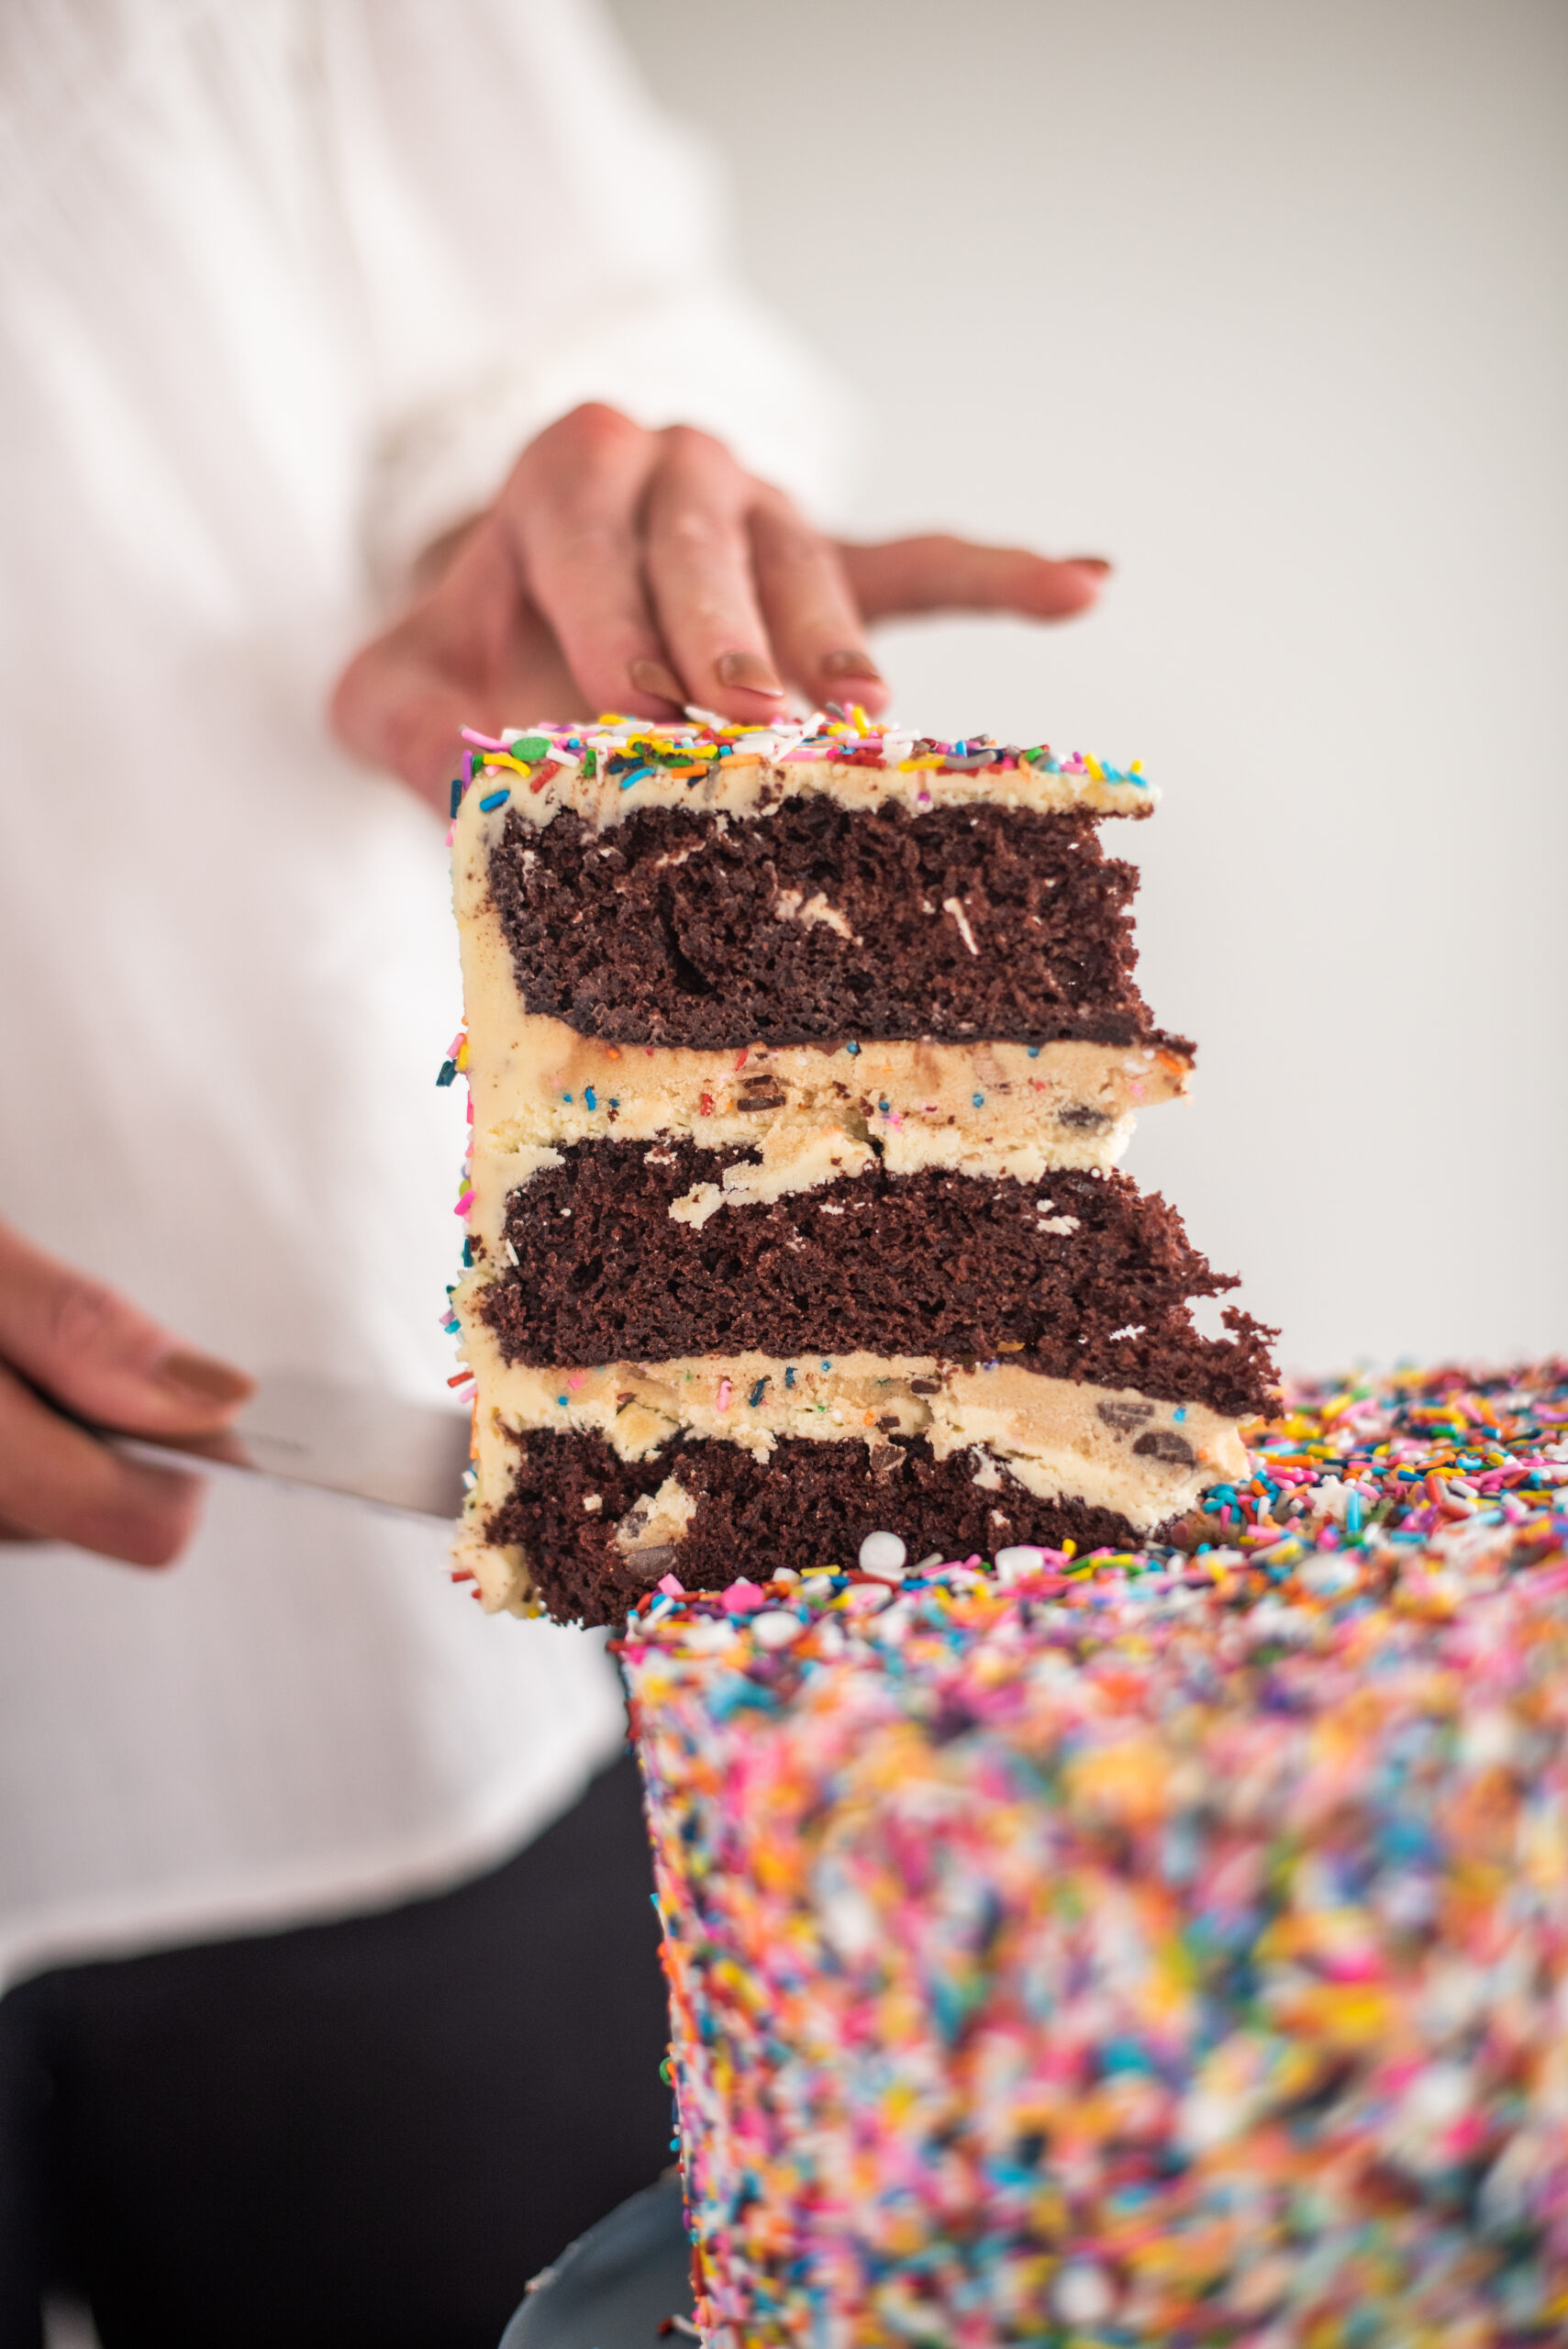 Chocolate cake layers with edible chocolate chip cookie dough and cake batter buttercream